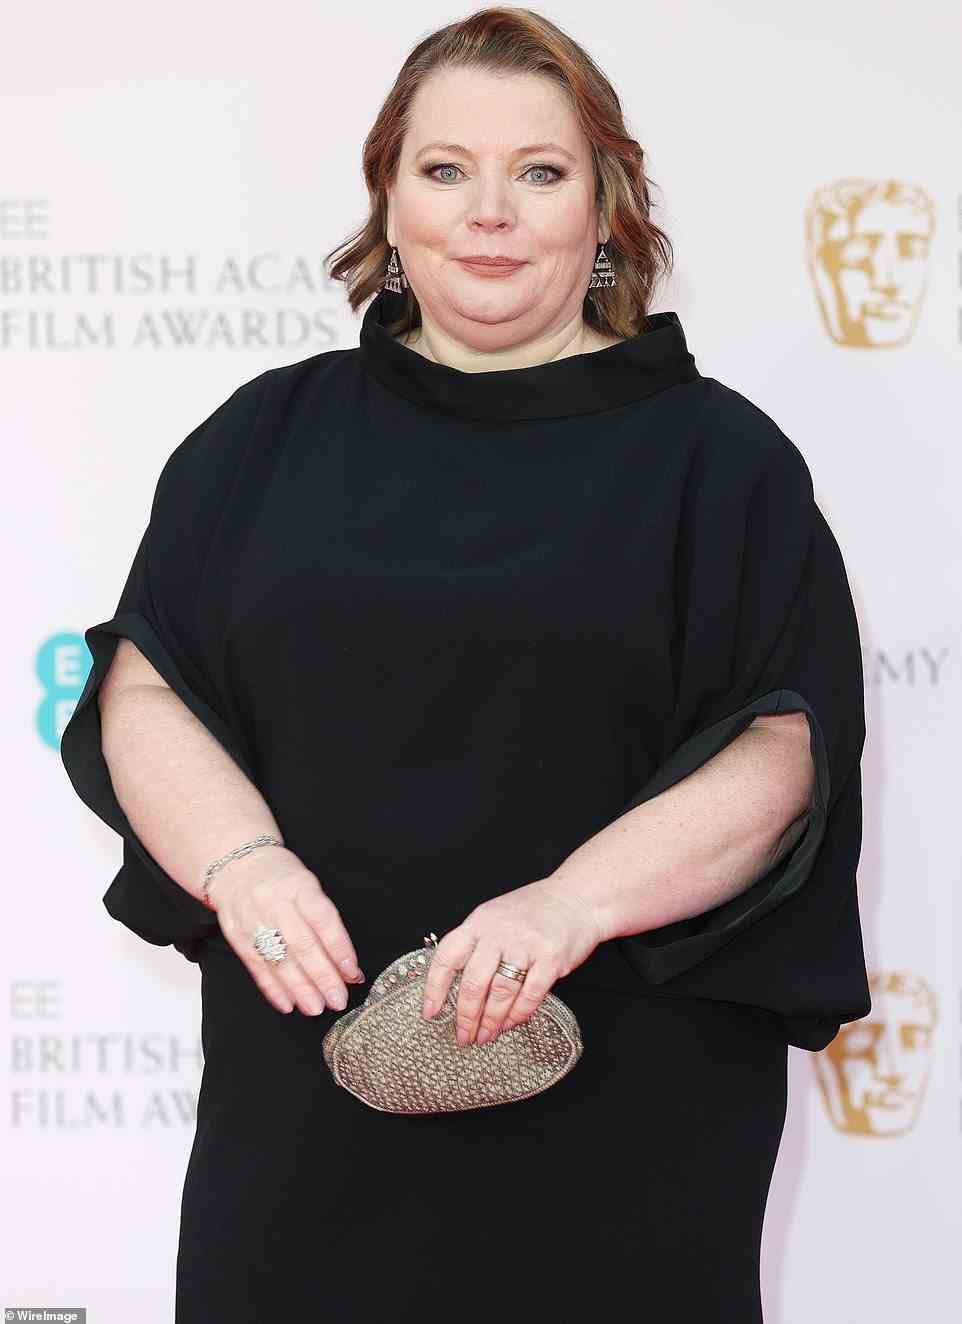 Glowing: Joanna Scanlan has been nominated for Best Leading Actress for her role in After Love